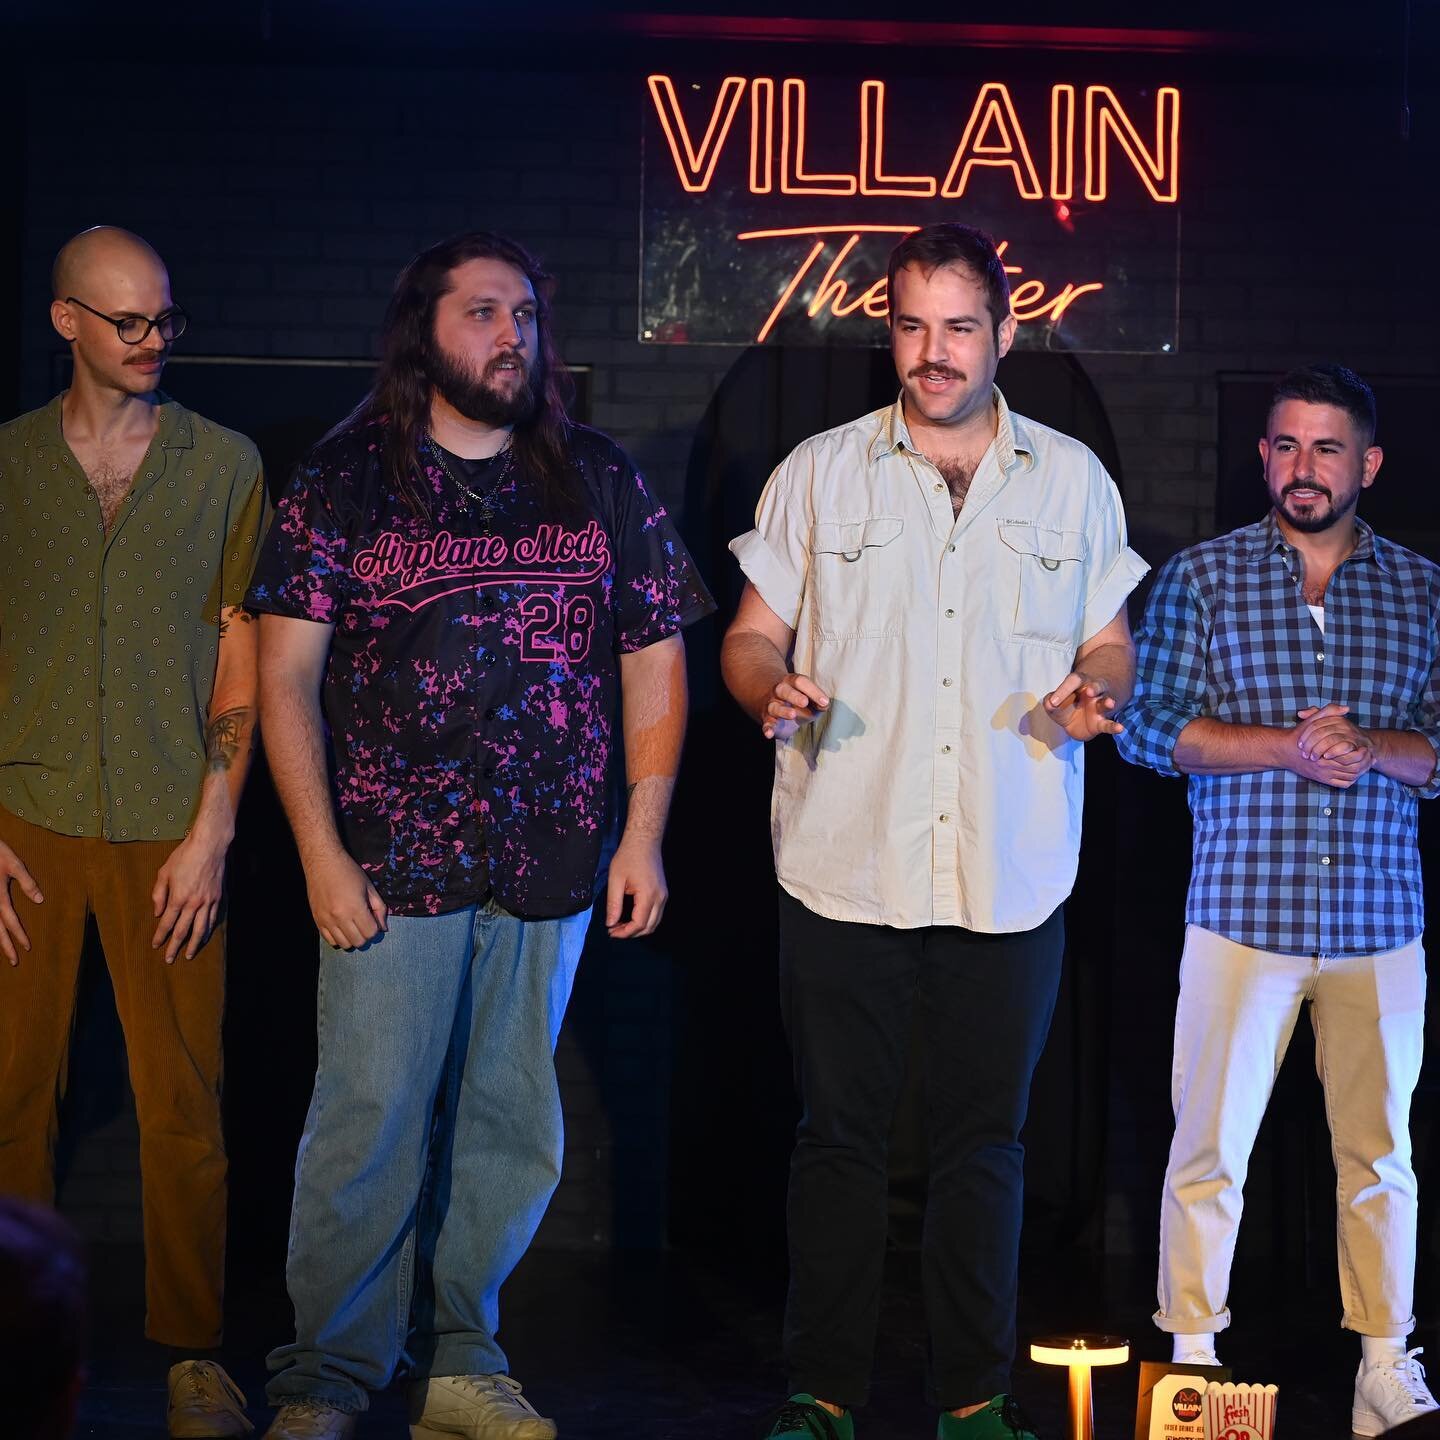 Miami, tonight is the night! Join us at Villain Theater for a comedy extravaganza as our talented VT-1 students take the stage for their graduation show. Be prepared to witness their comedic prowess in full swing. Don't miss out on this memorable nig